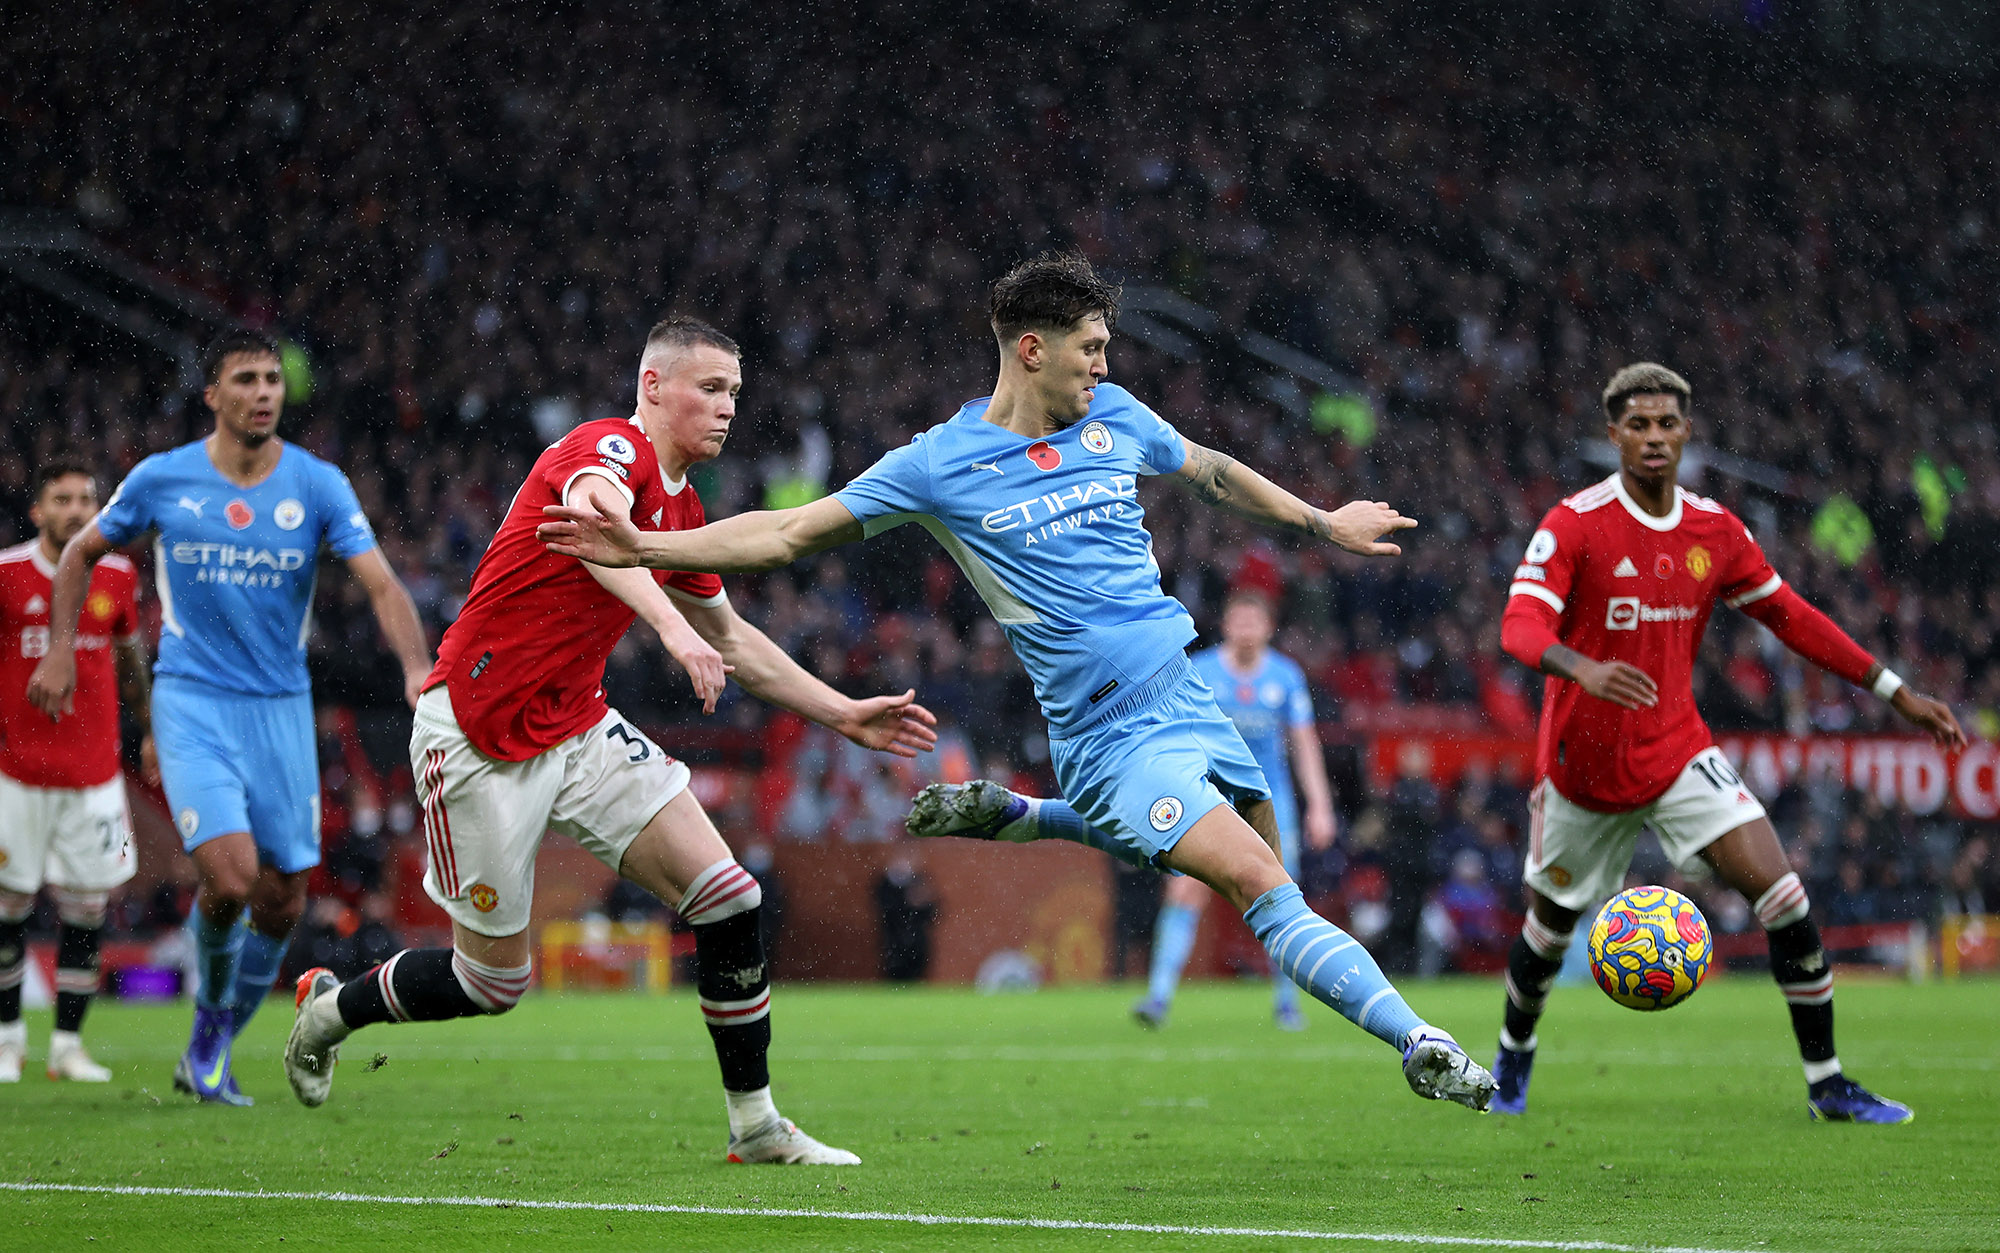 More Old Trafford Misery for United With 2-0 Loss to City